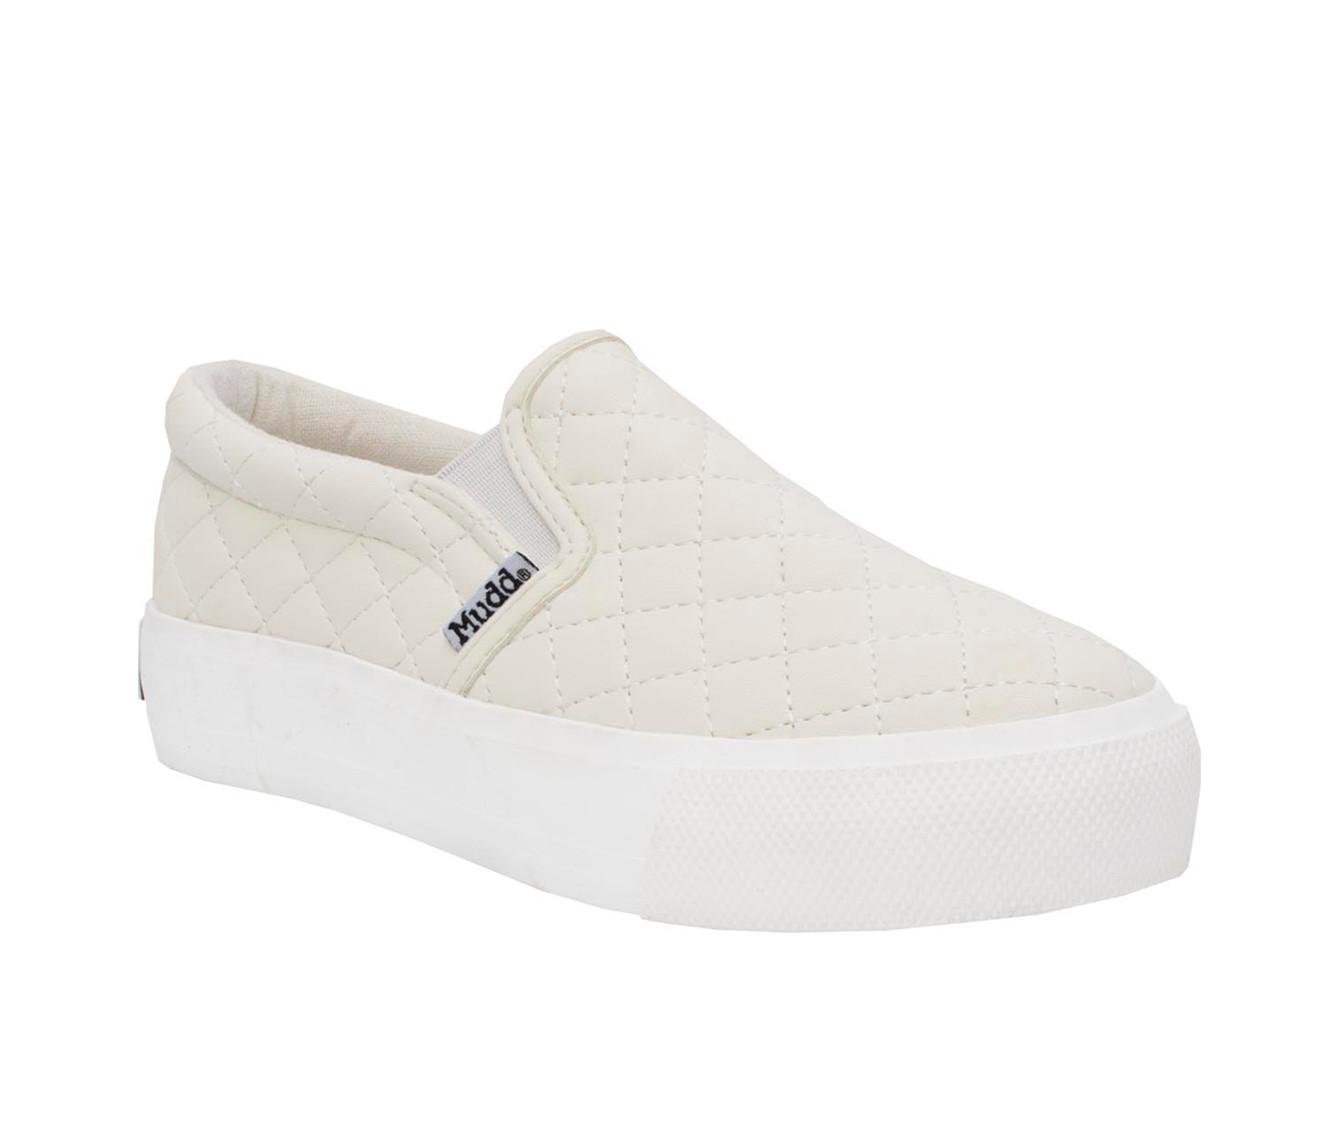 Women's Mudd Beyley Quilted Slip On Shoes